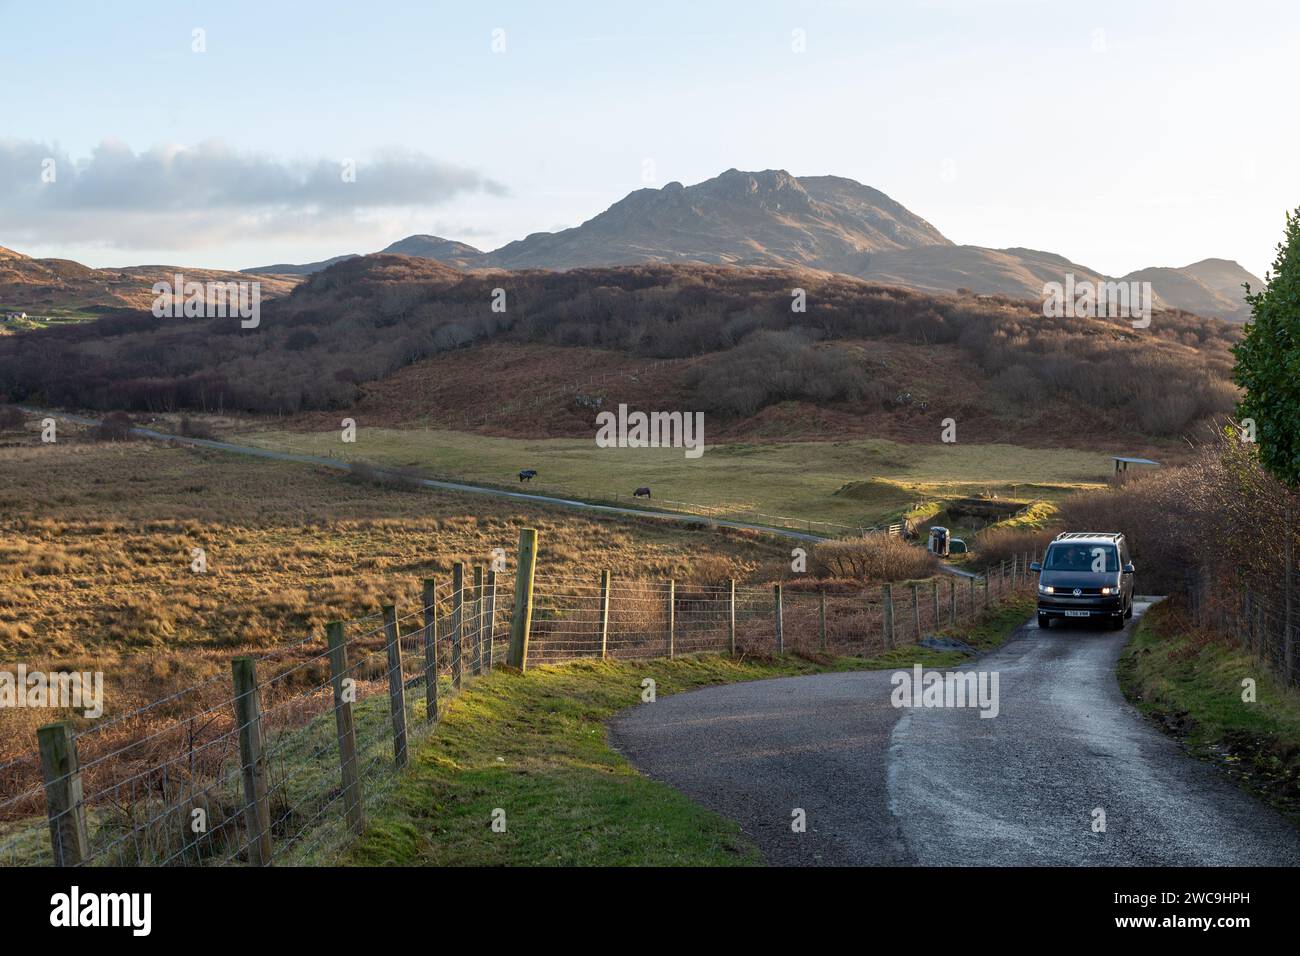 A campervan on a rural single track road on the Ardnamurchan Peninsula with the hill Beinn na Seilg in the background Stock Photo